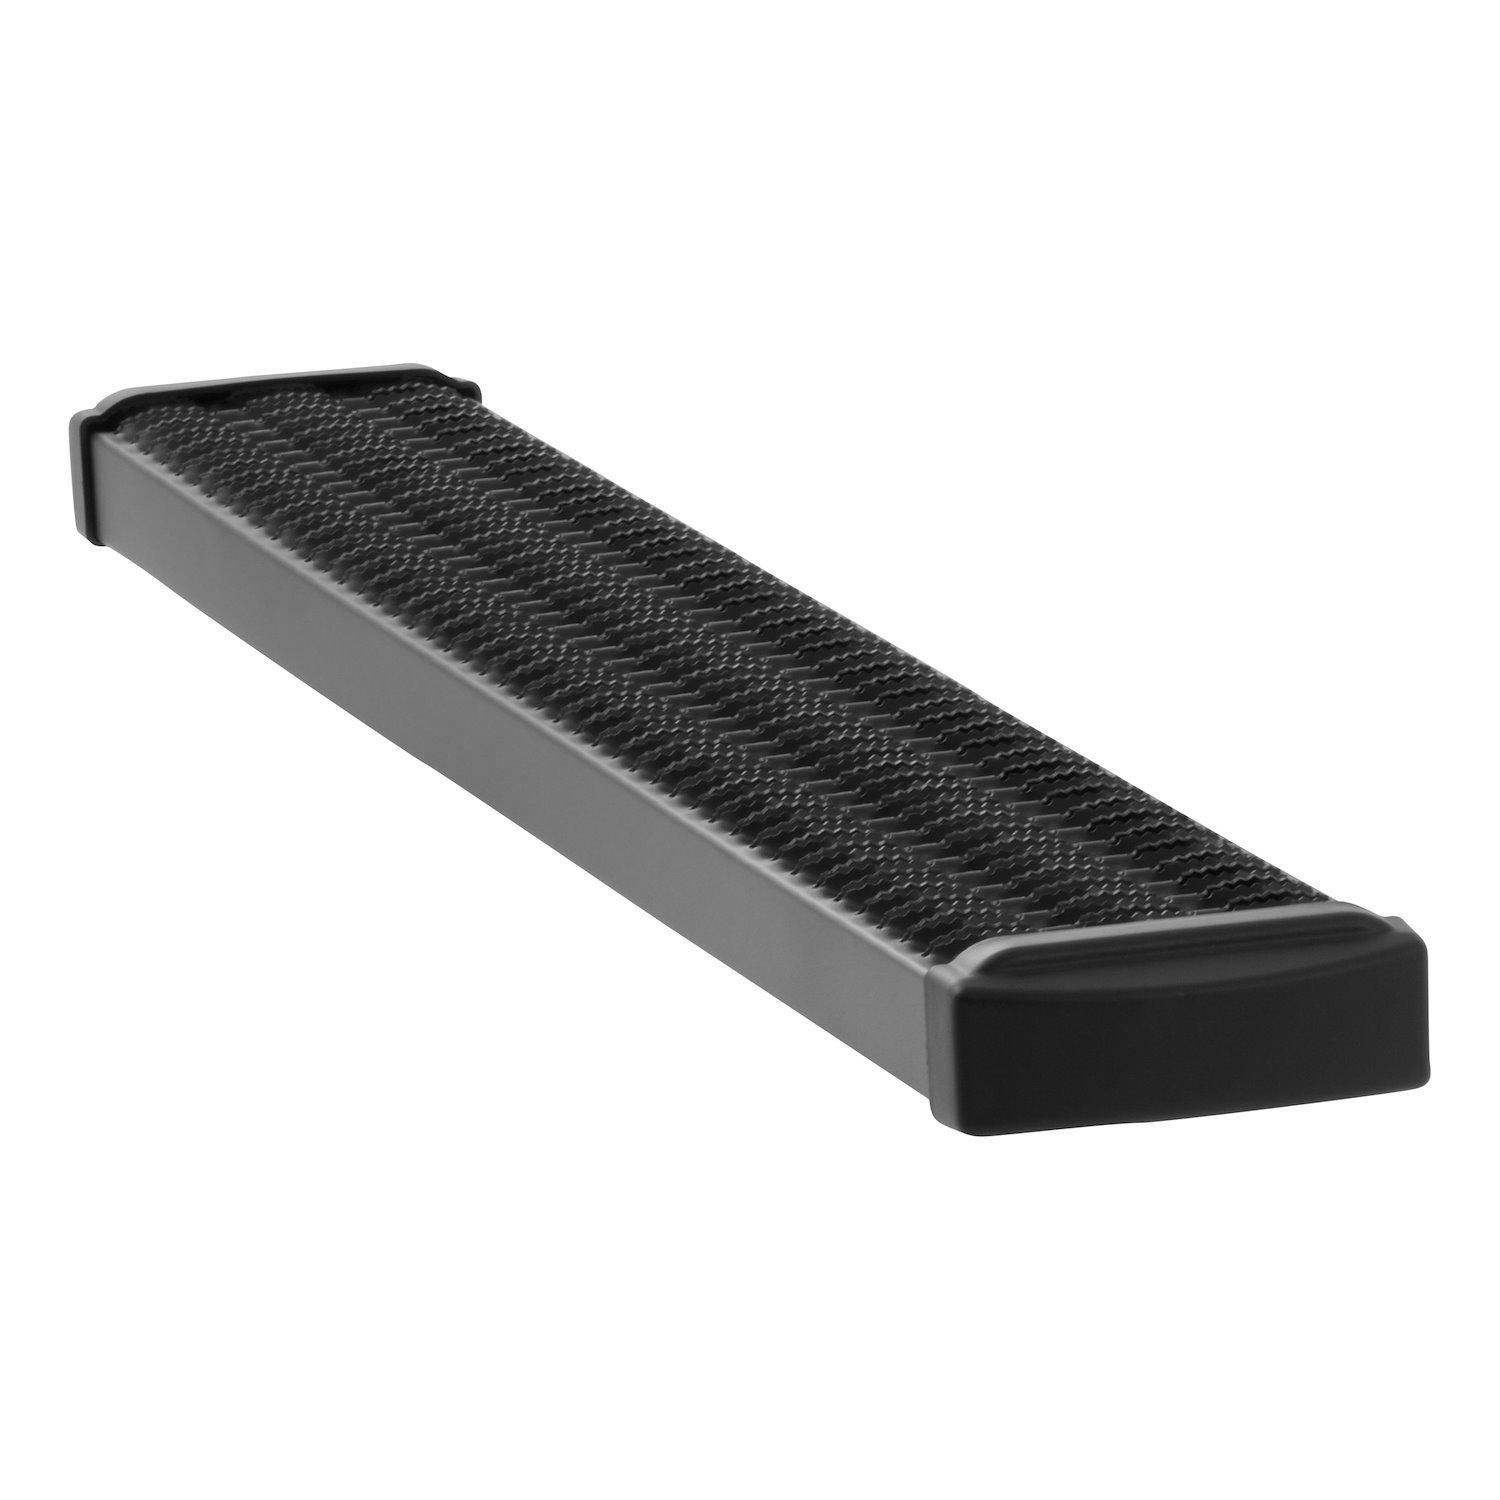 415254-400345 Grip Step 7 in. x 54 in. Black Aluminum Rear Step Fits Select Chevy Express, GMC Savana